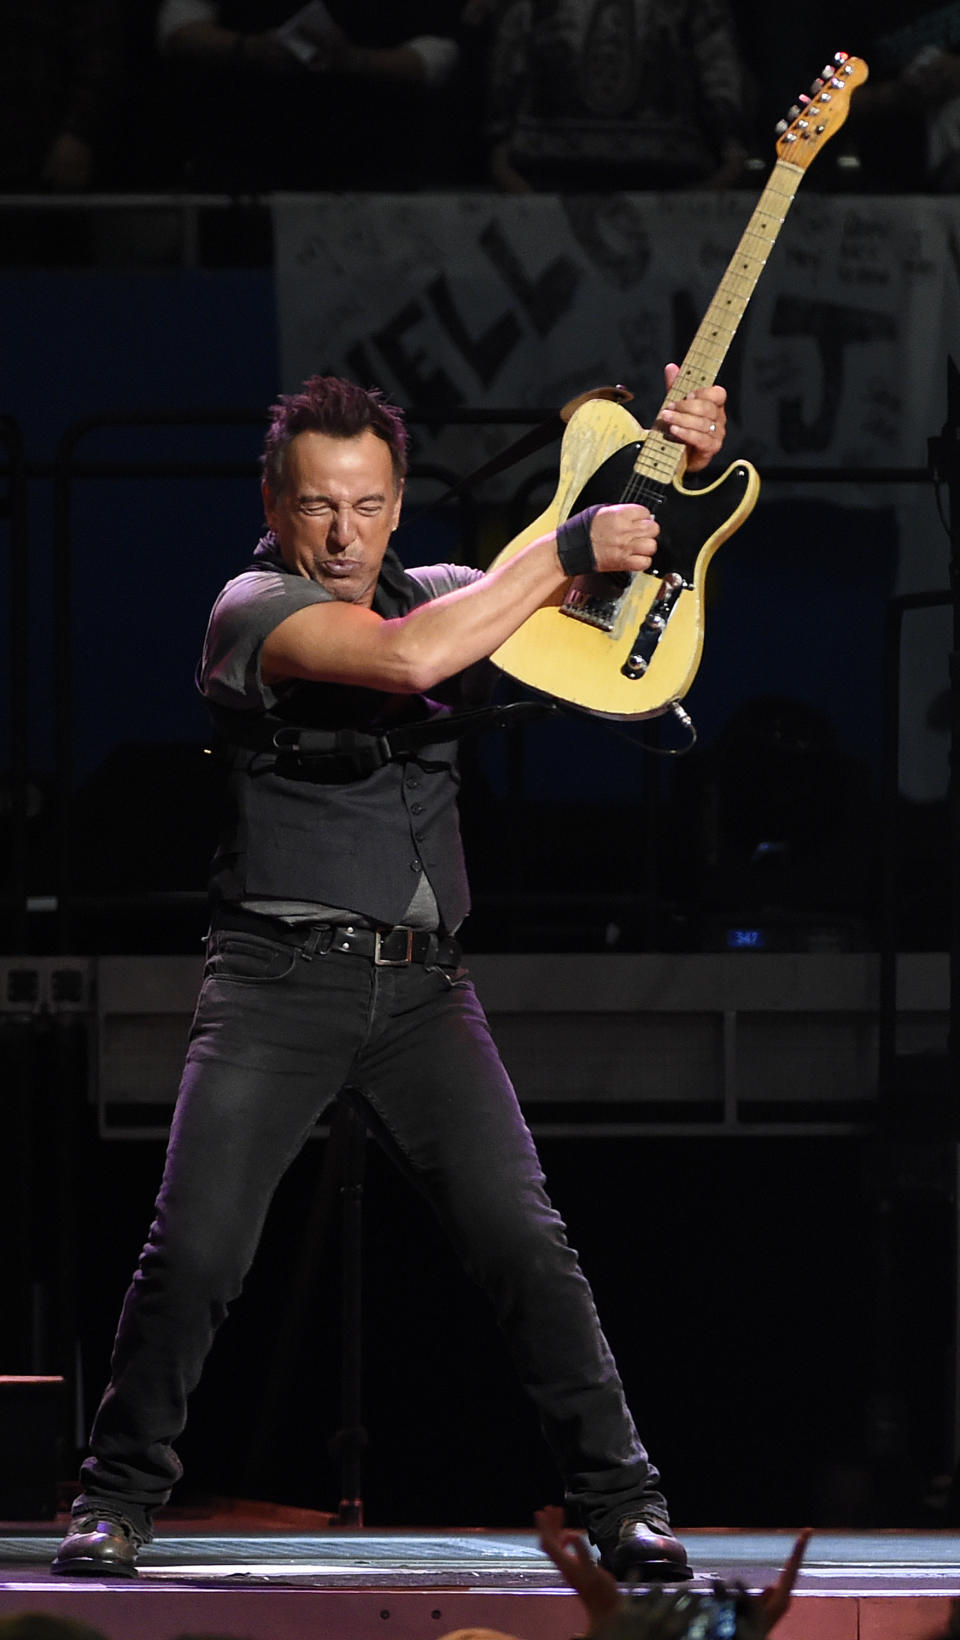 FILE - Bruce Springsteen performs with the E Street Band at the Los Angeles Sports Arena on March 15, 2016. Springsteen's latest album, "Letter To You" will be released on Oct. 23. (Photo by Chris Pizzello/Invision/AP, File)